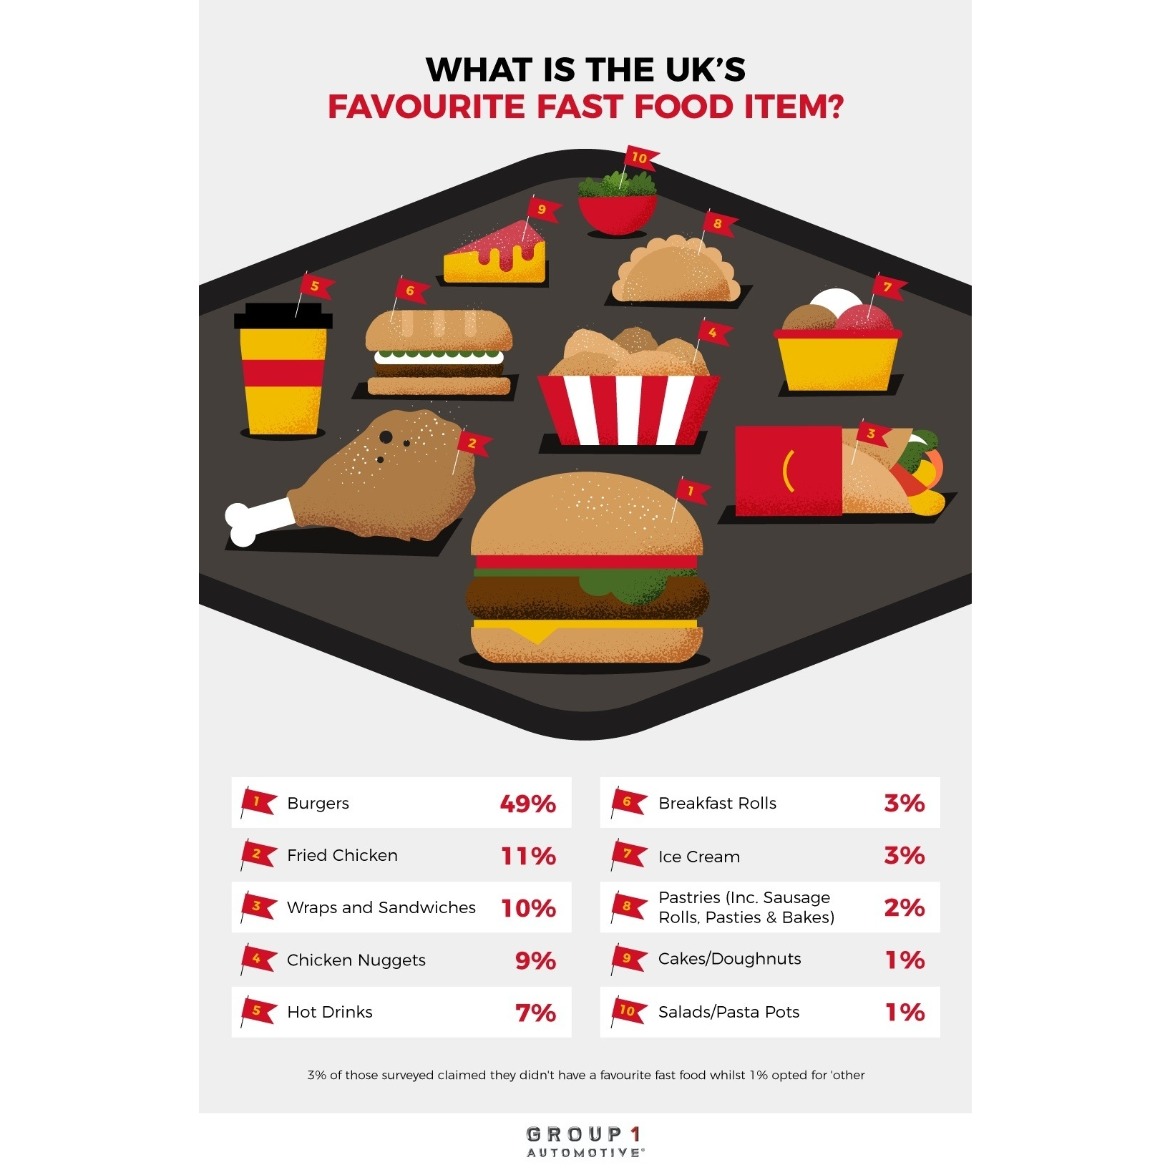 The UK’s favourite fast food